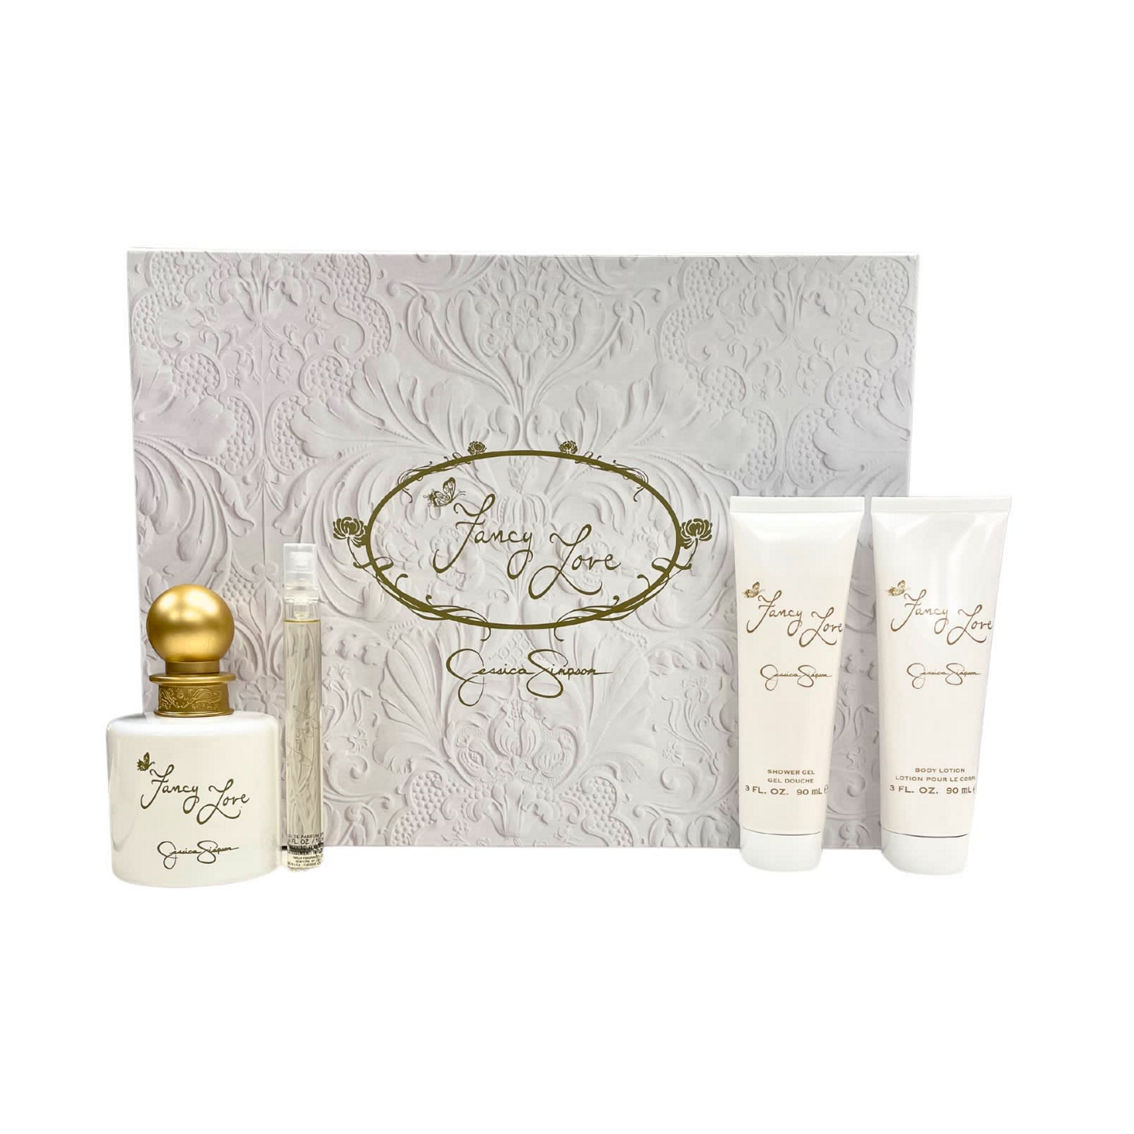 Jessica Simpson Fancy Love 4 Pc. Gift Set for Women - Image 2 of 2